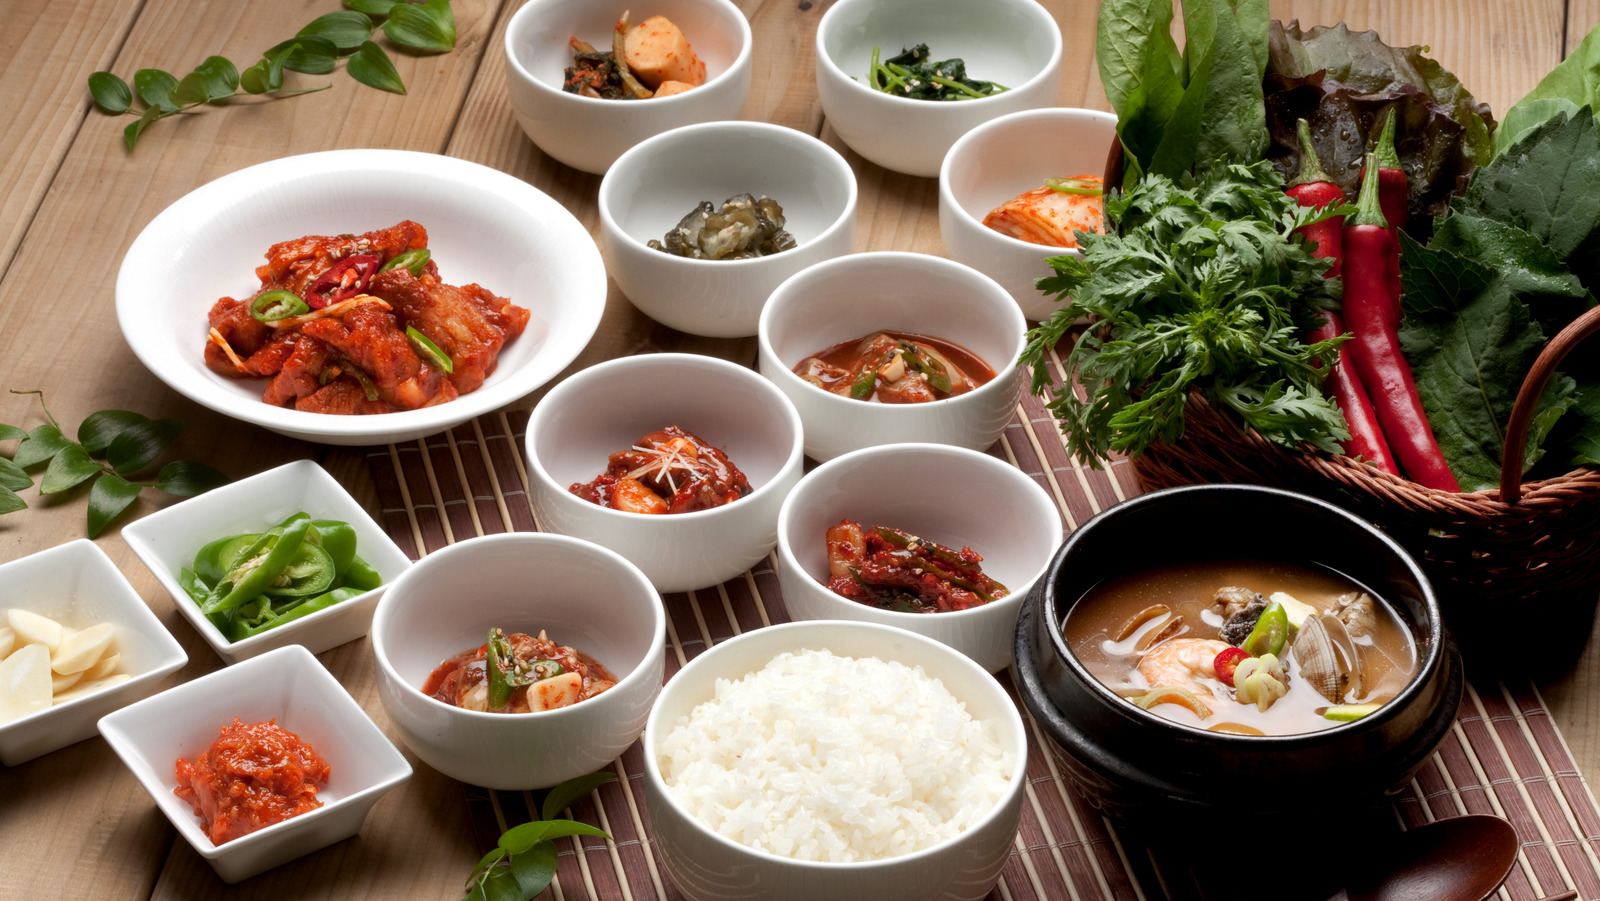 https://www.tastingtable.com/img/gallery/26-korean-dishes-everyone-need-to-try-once/l-intro-1674489152.jpg